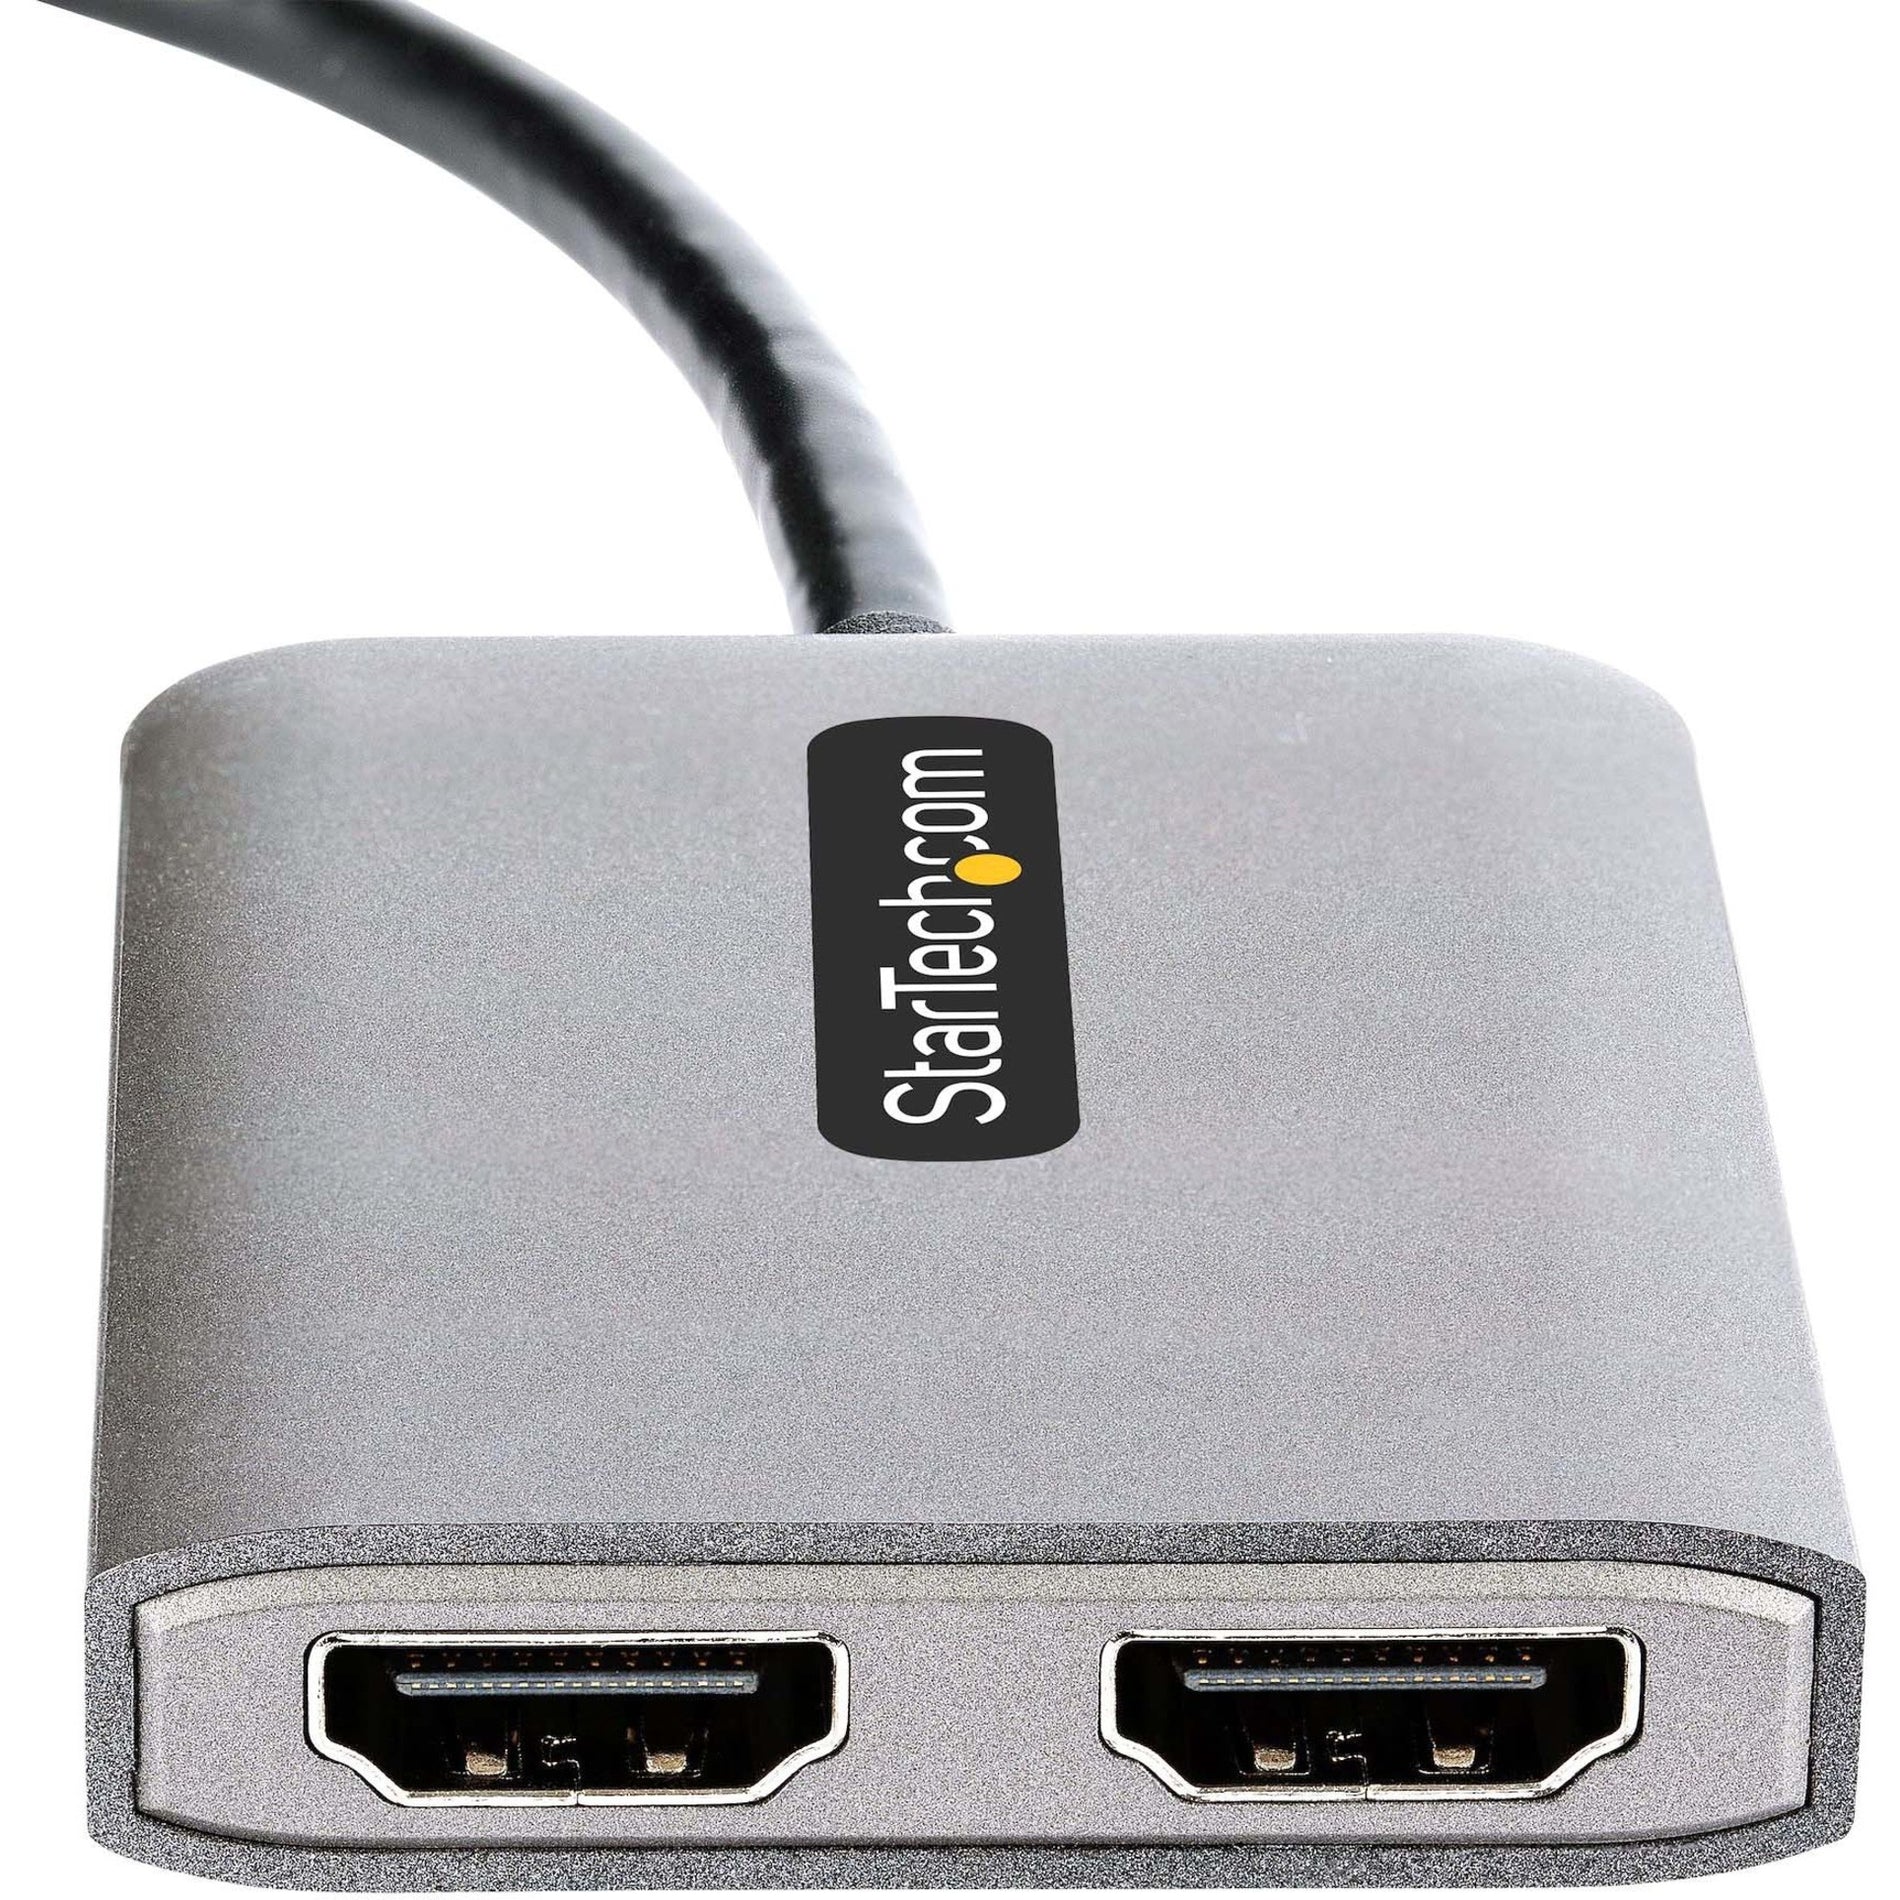 StarTech.com MST14DP122HD DisplayPort to Dual HDMI MST Hub, Dual HDMI 4K 60Hz, 2 Port DisplayPort Multi Monitor Adapter with 1ft/30cm Cable